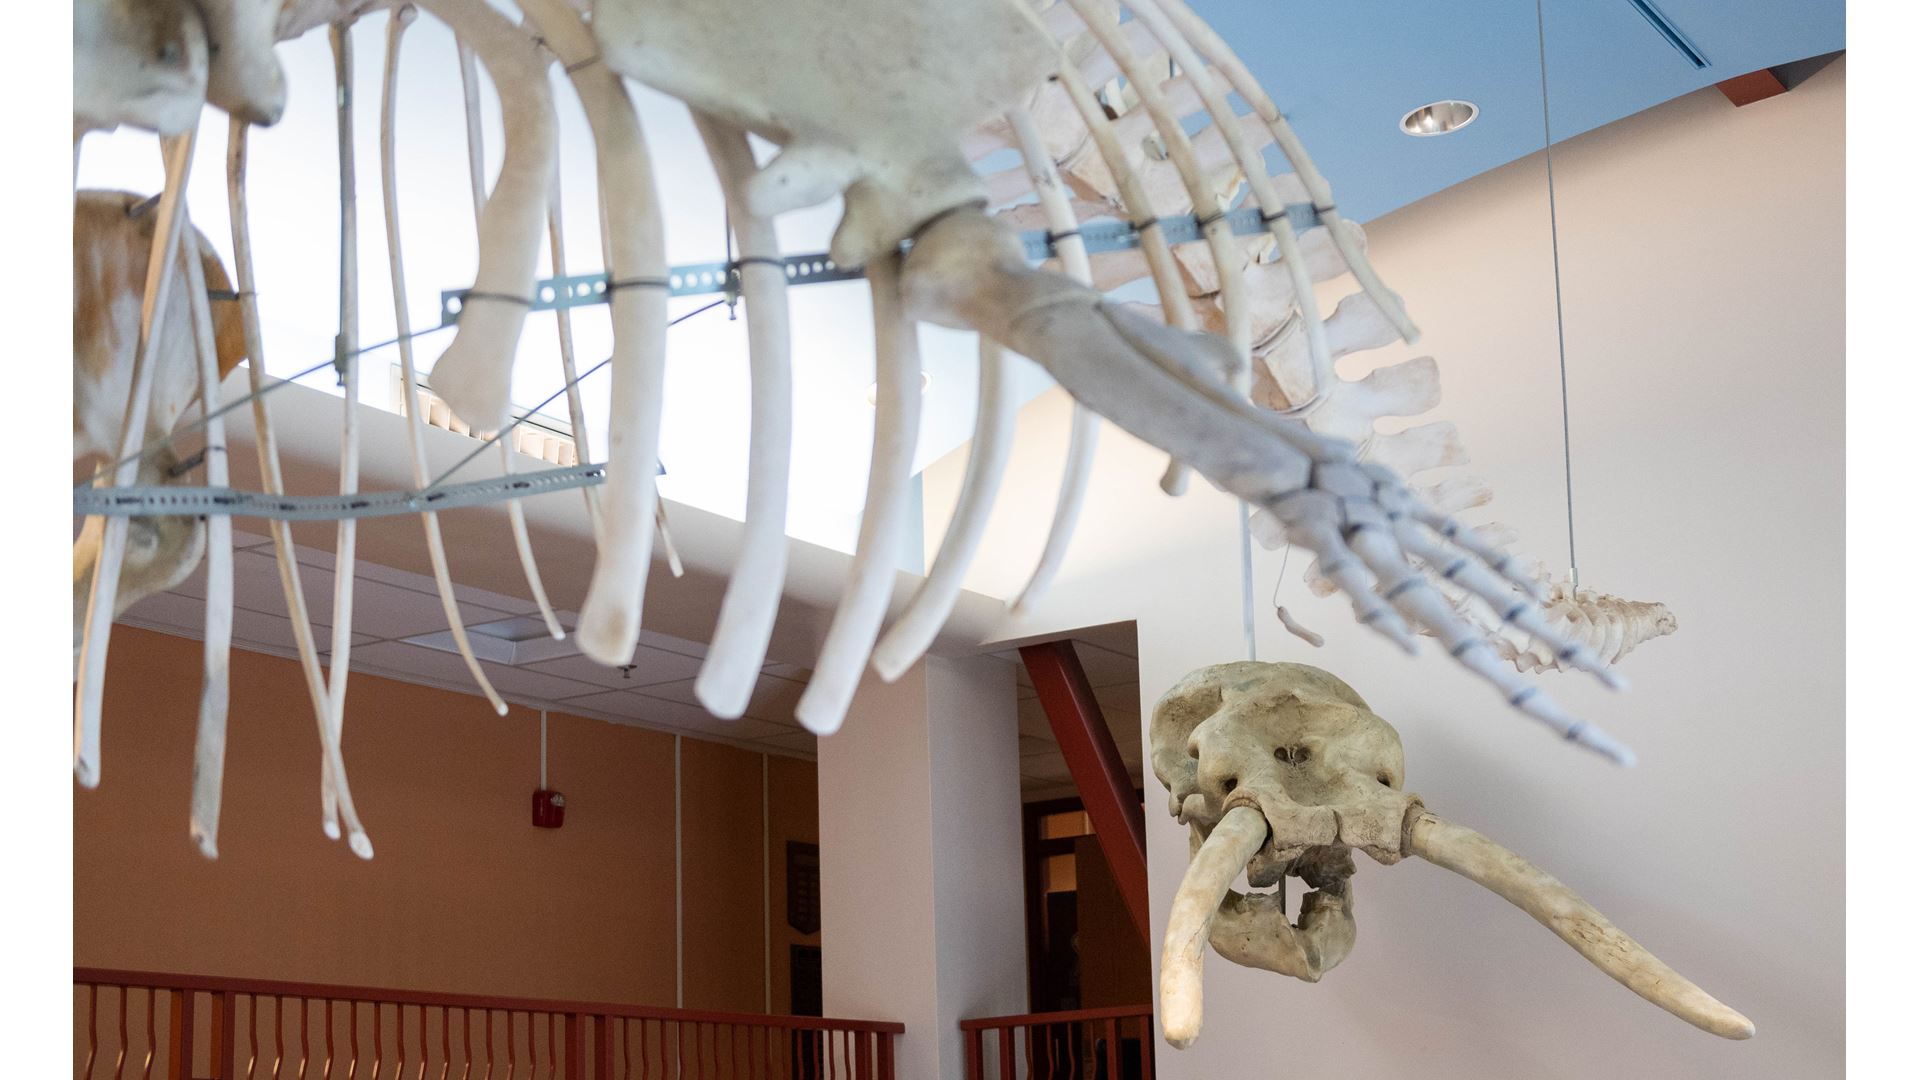 Rare fossil of ancient elephant ancestor on display at NMSU